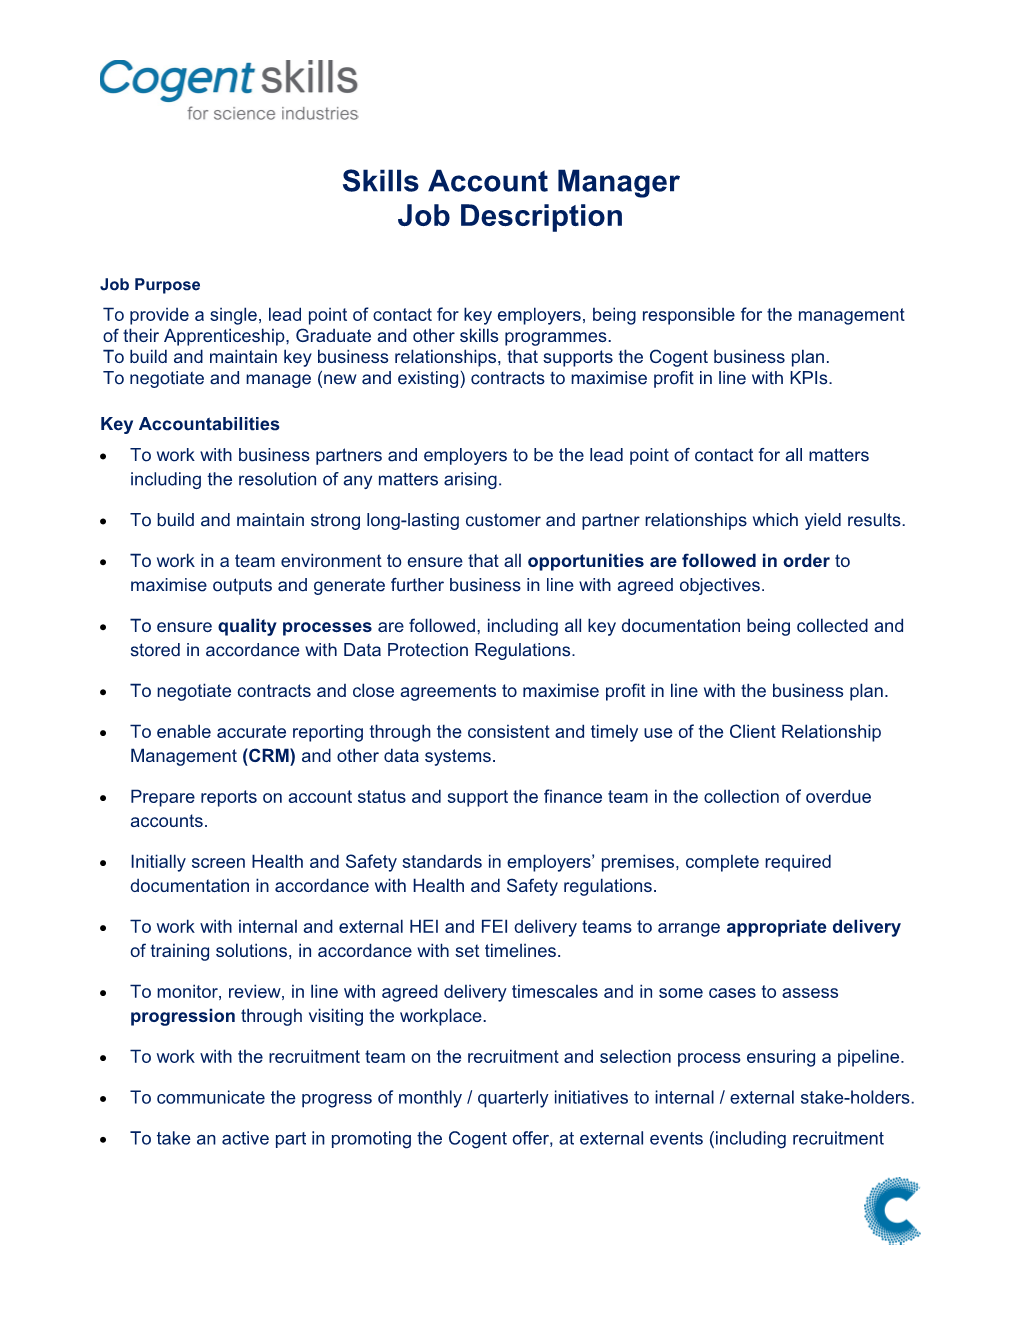 Skills Account Manager